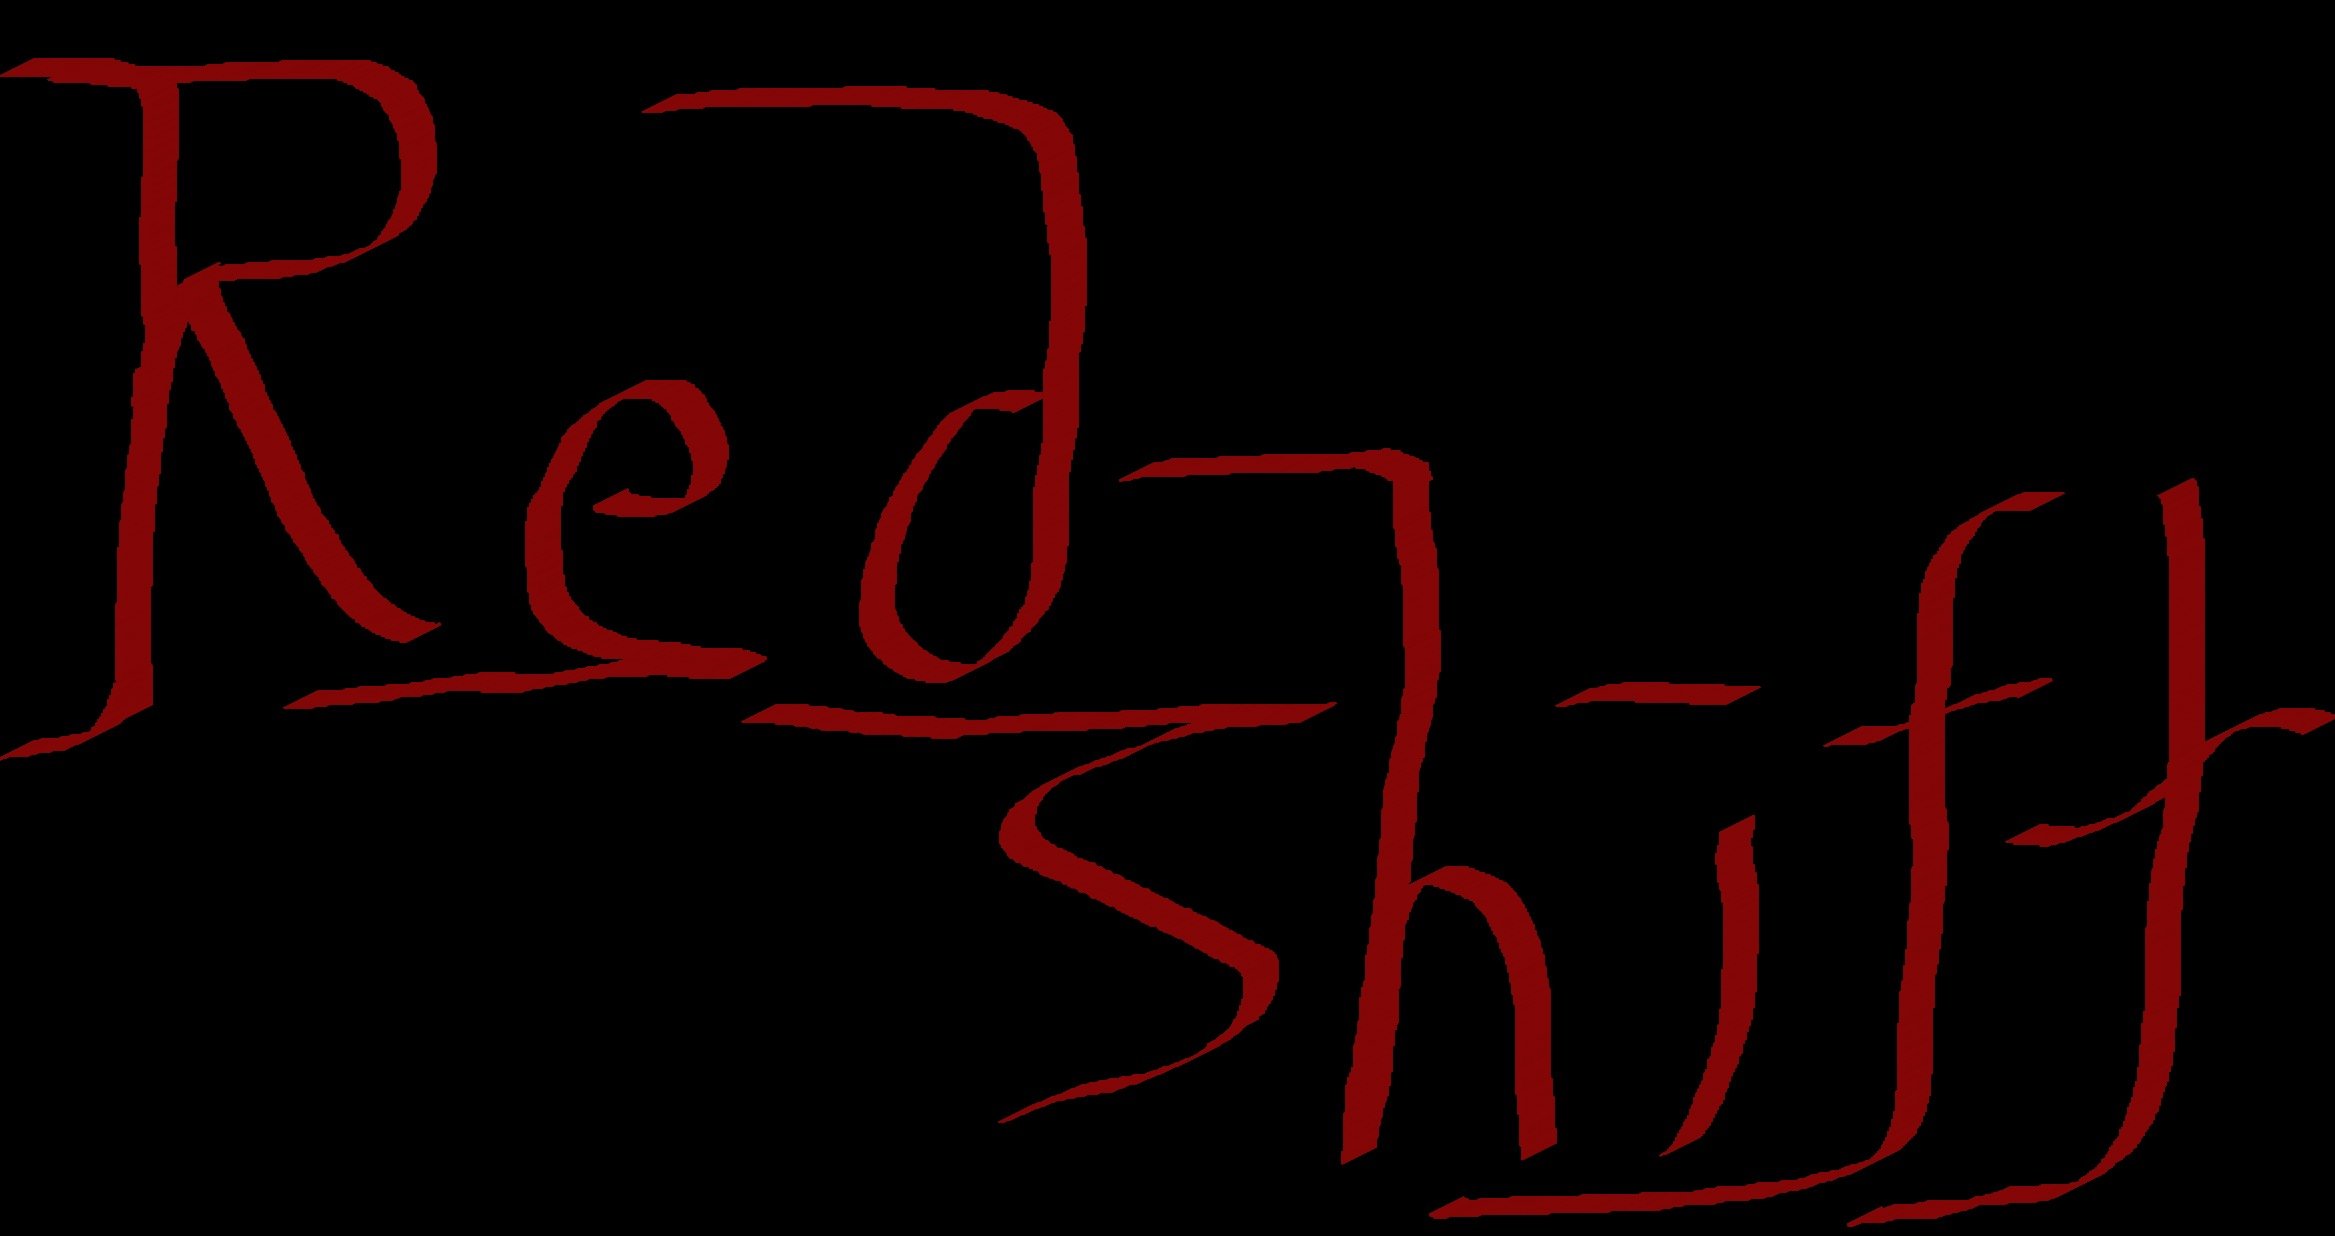 Red Shift - tribute